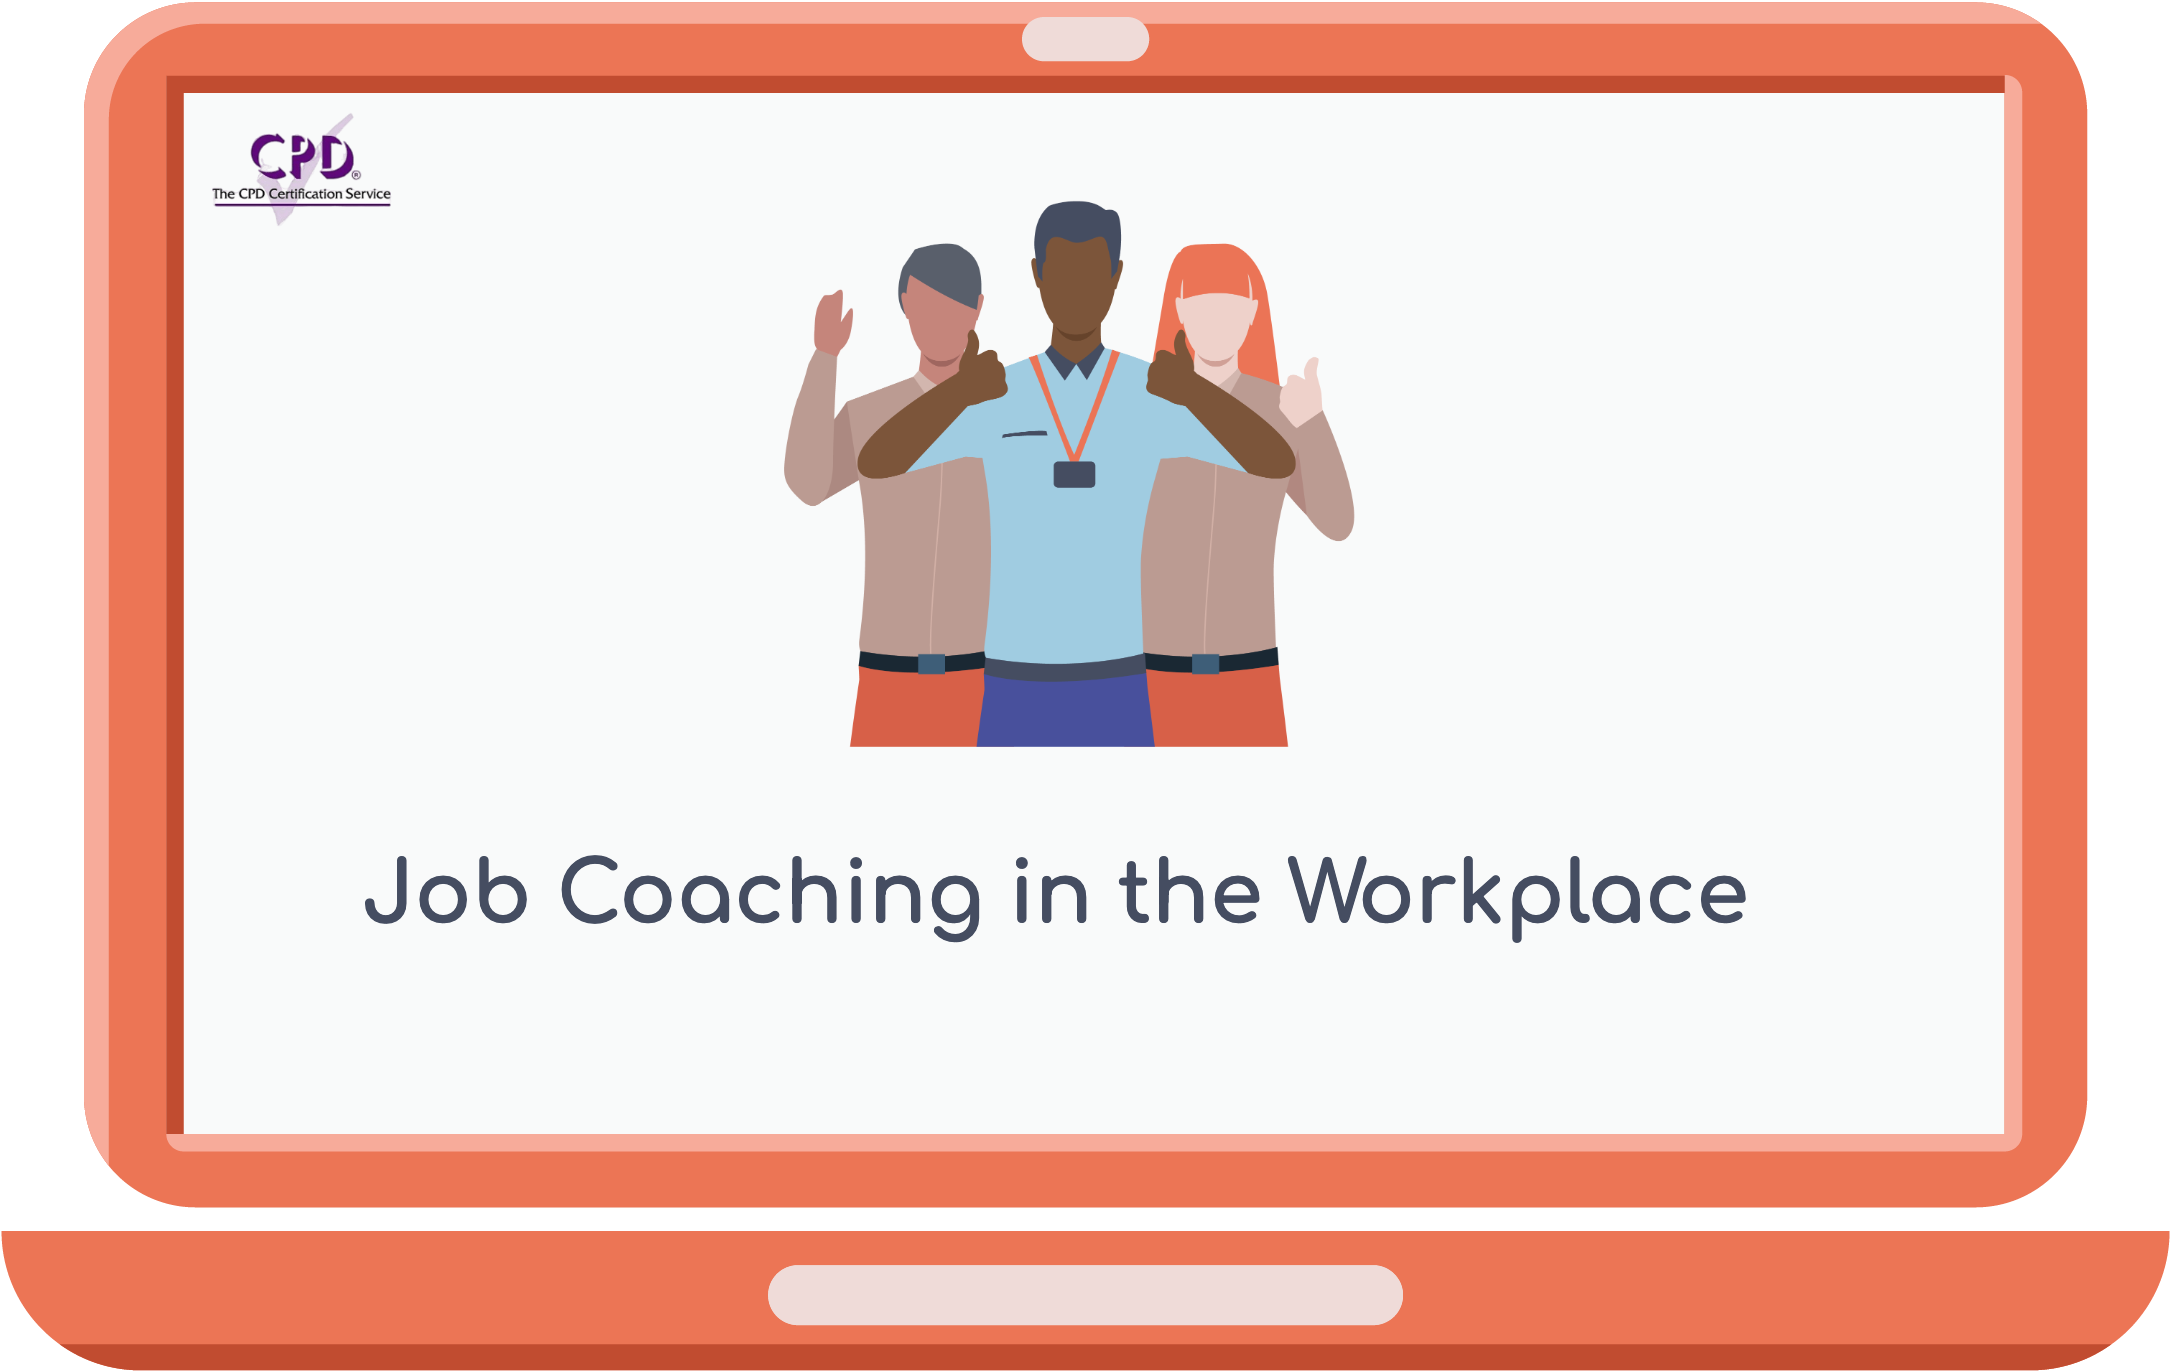 The main image for the Inclusive Working Job Coaching in the Workplace Video training